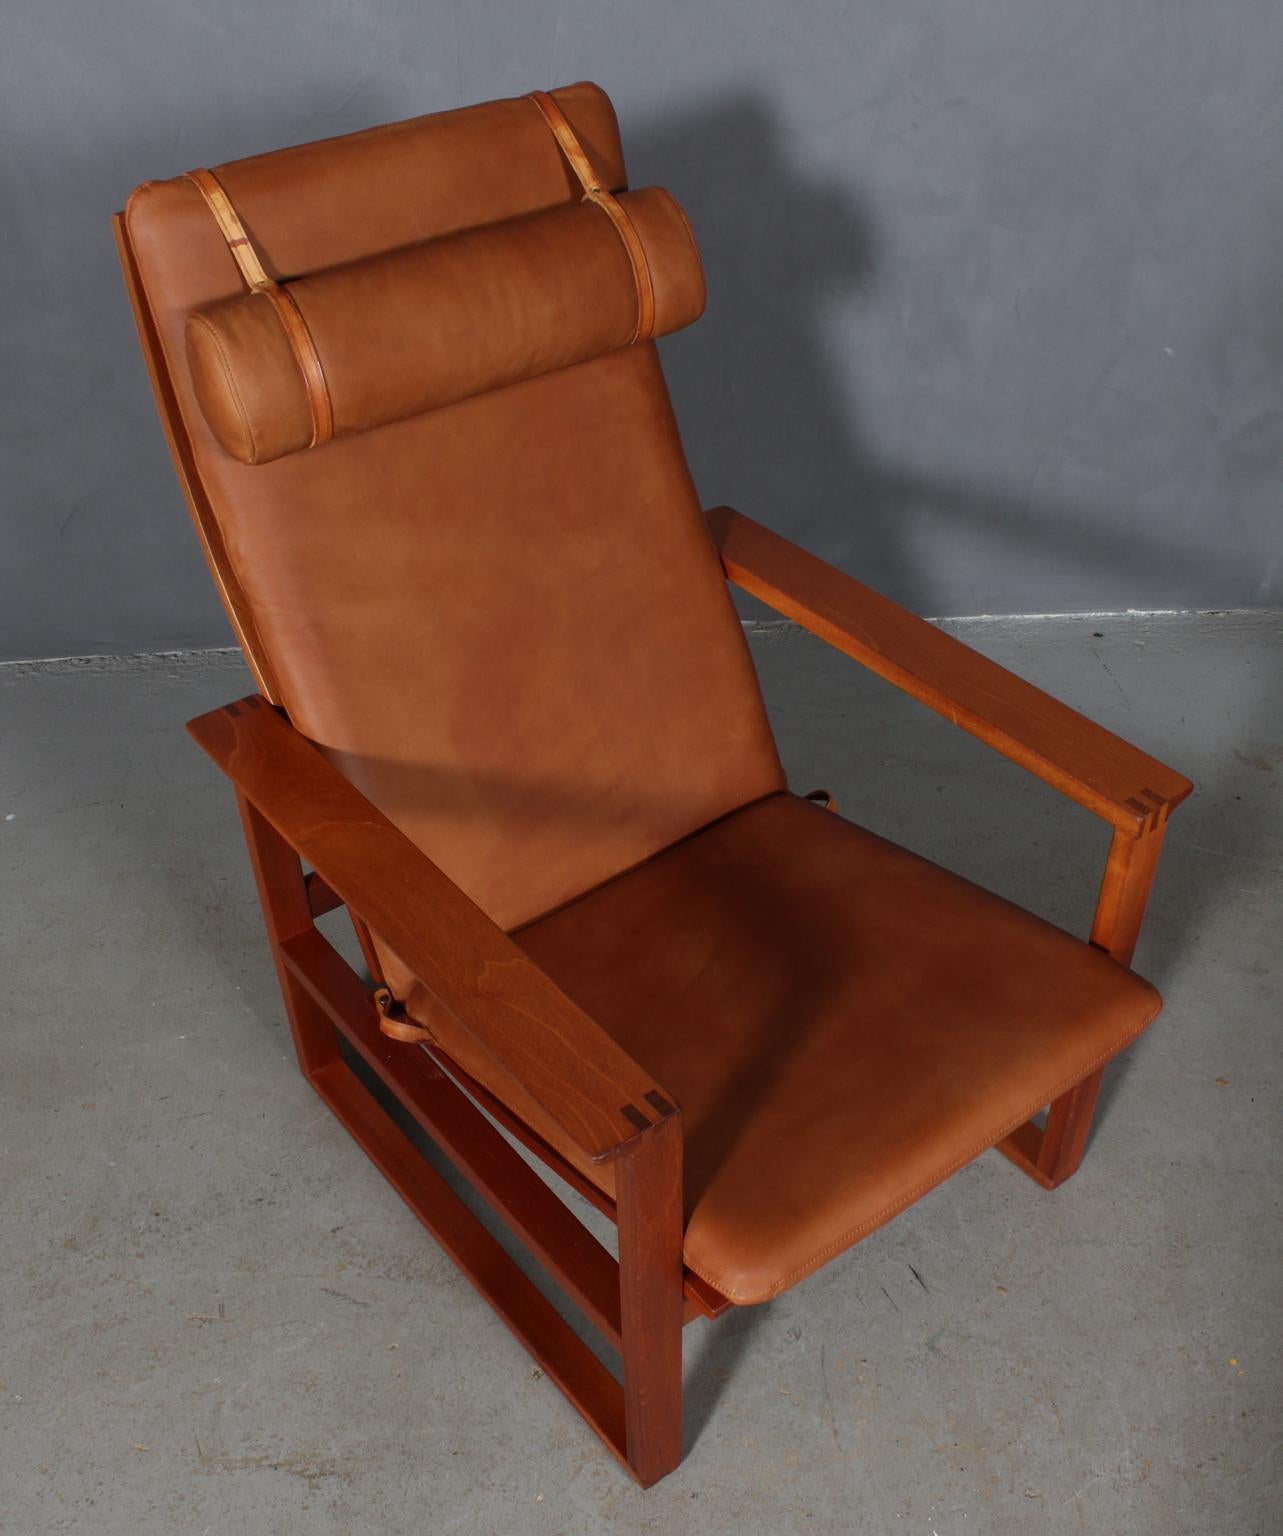 A Børge Mogensen lounge chairs designed in 1956 model number 2254 for Fredericia Stolefabrik. Cubical frames made of solid mahogany with finger joints and cane. 

Reupholstered in vintage tan aniline leather. The seat cushion can be fixed with a